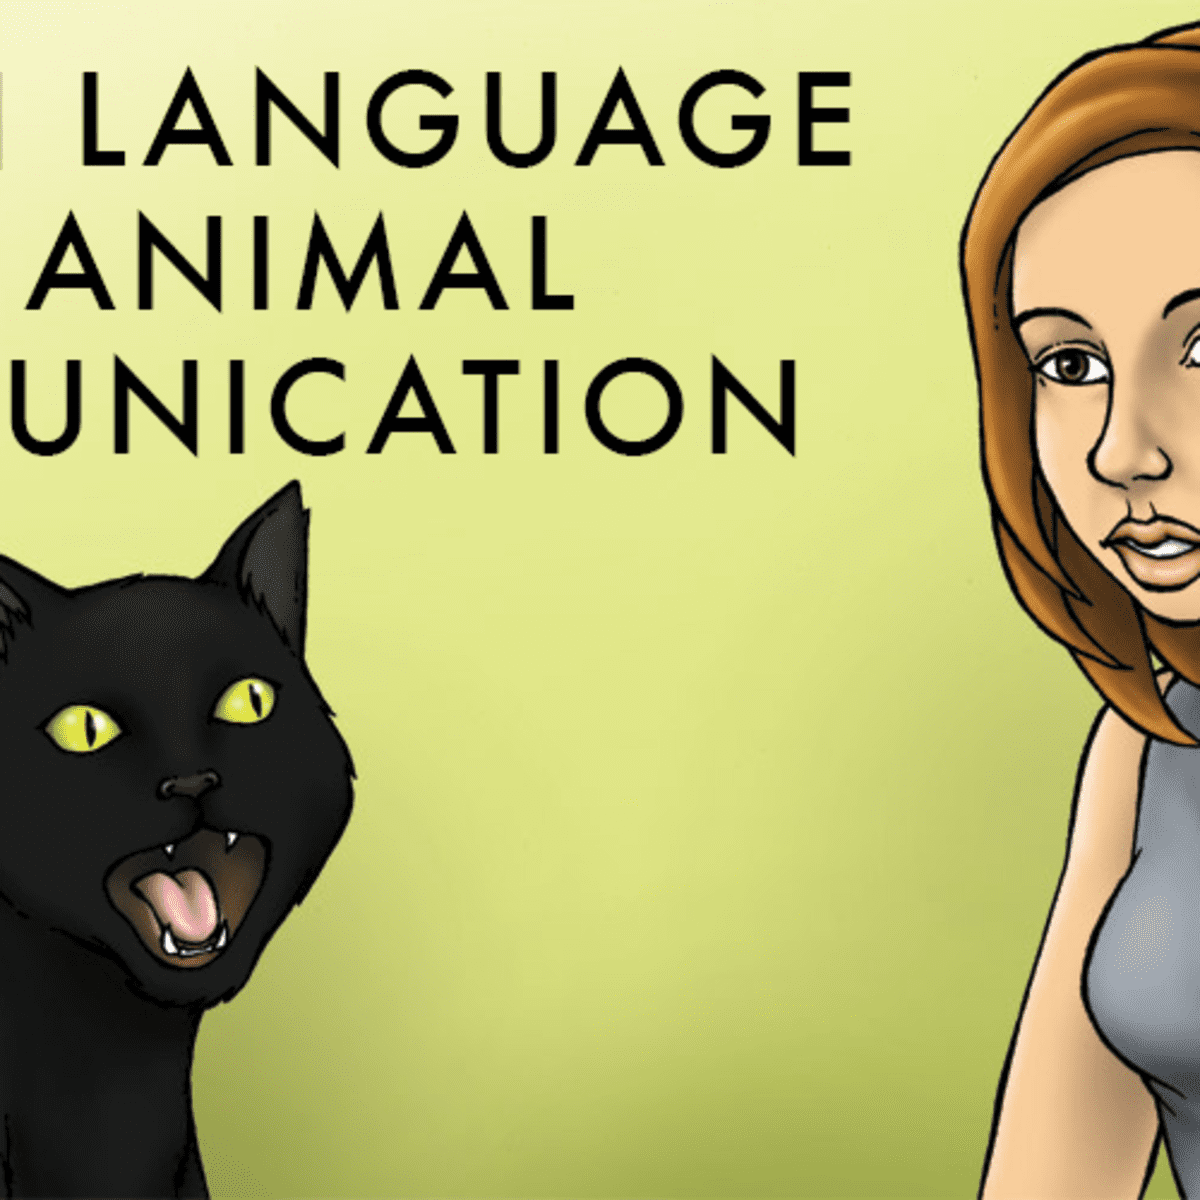 Differences Between Animal and Human Communication - Owlcation